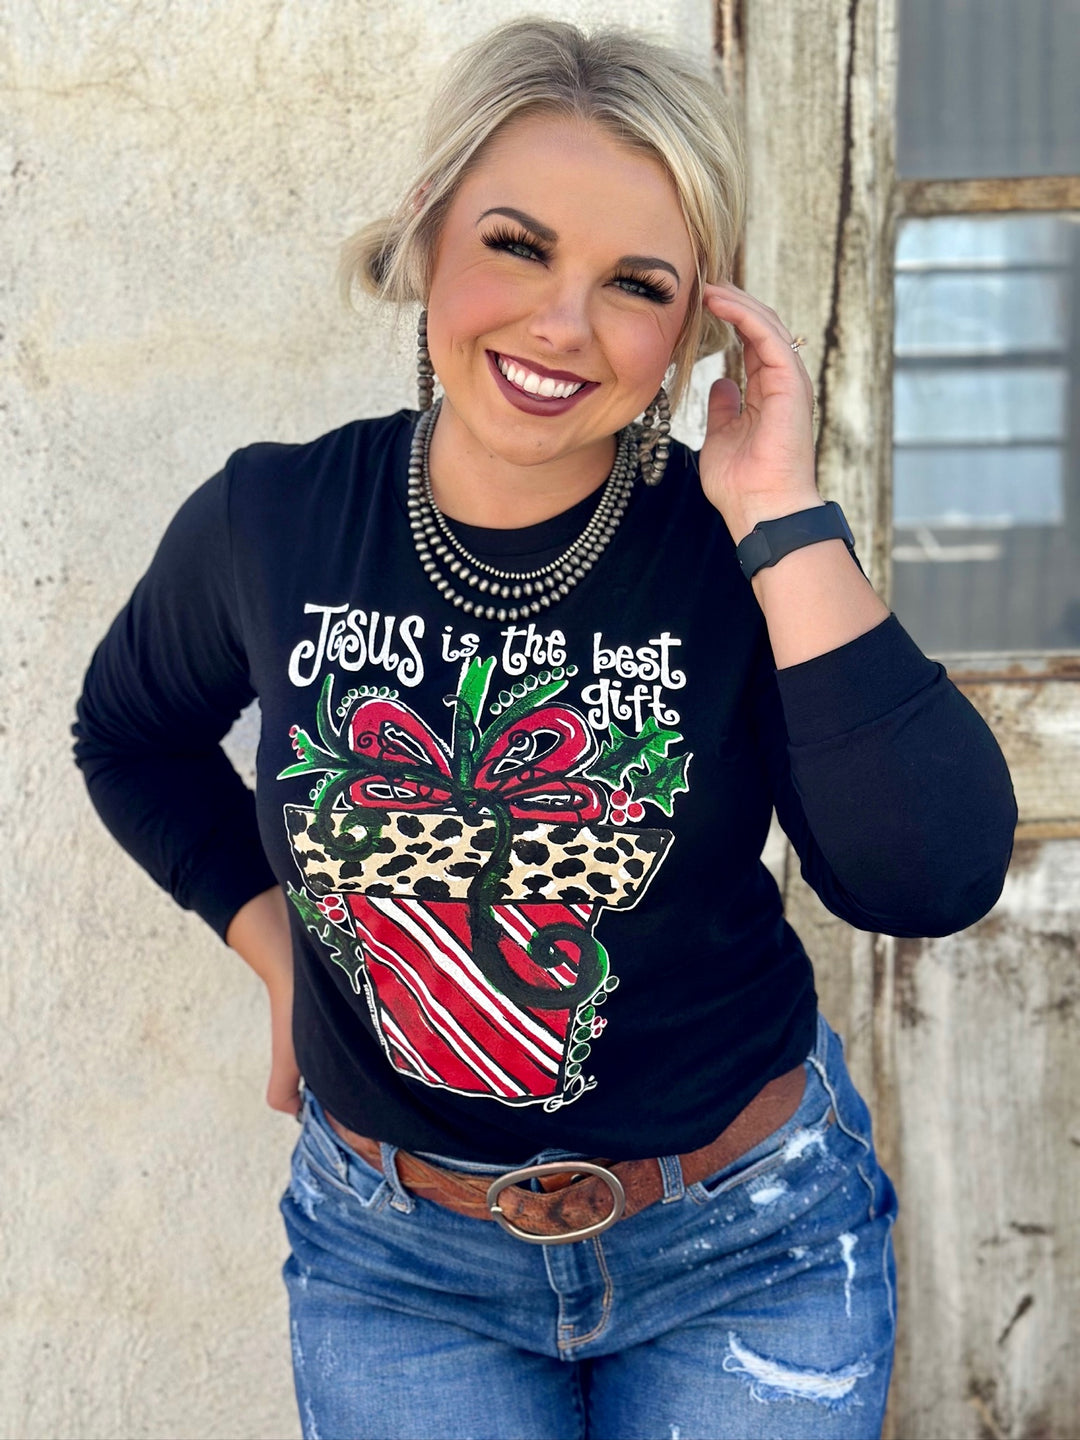 Long Sleeve Callie's Jesus is the Best Gift Graphic Tee by Texas True Threads